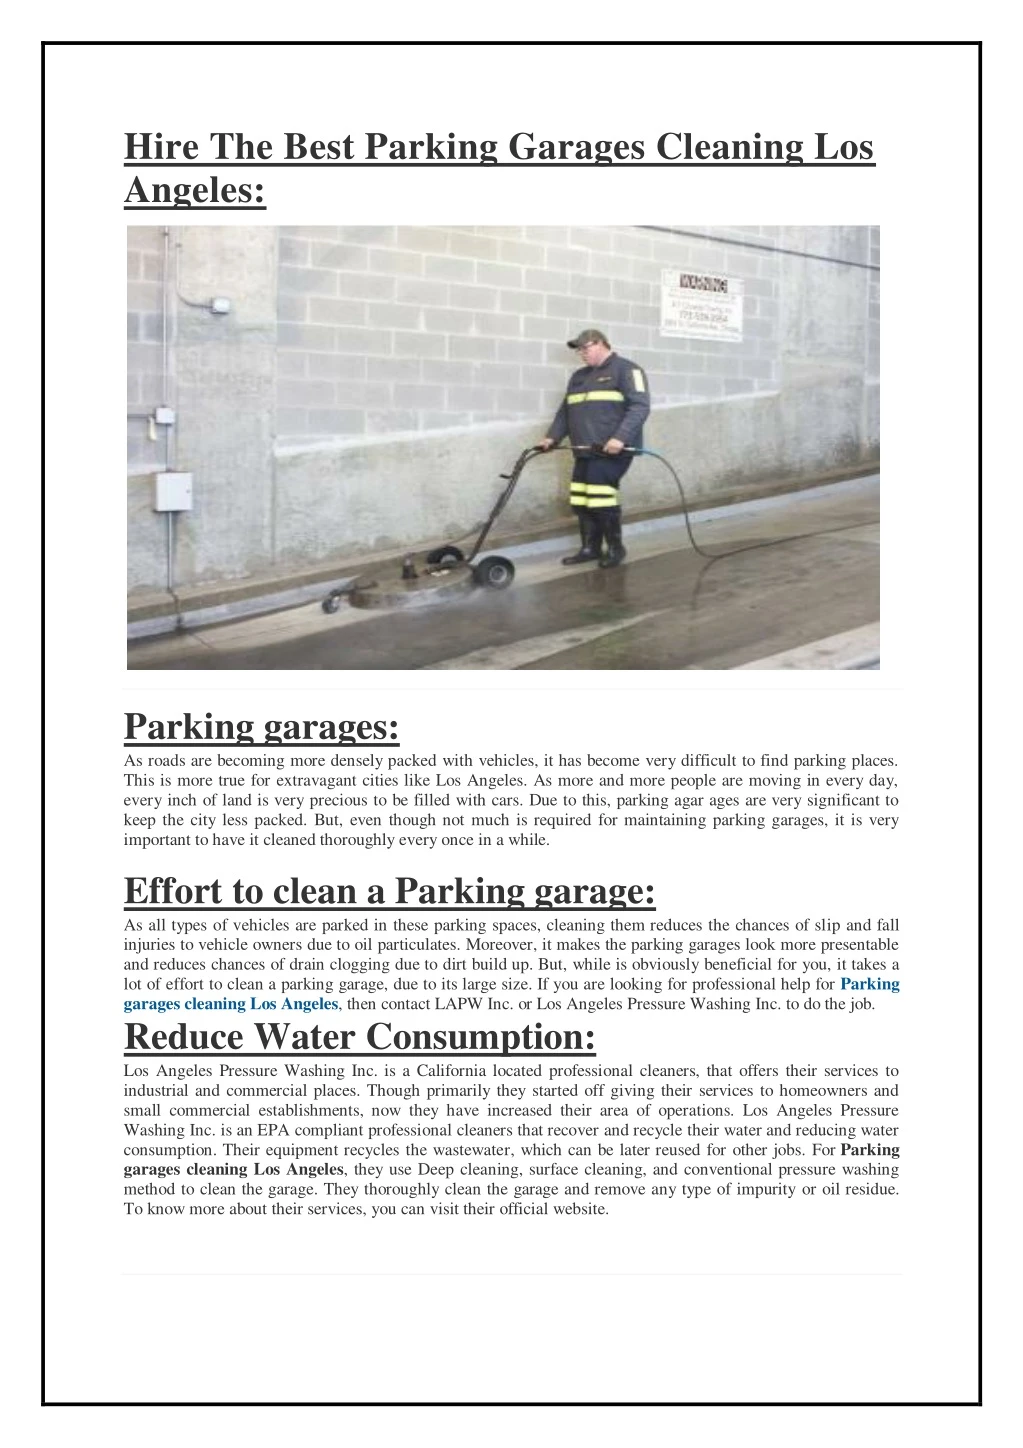 hire the best parking garages cleaning los angeles